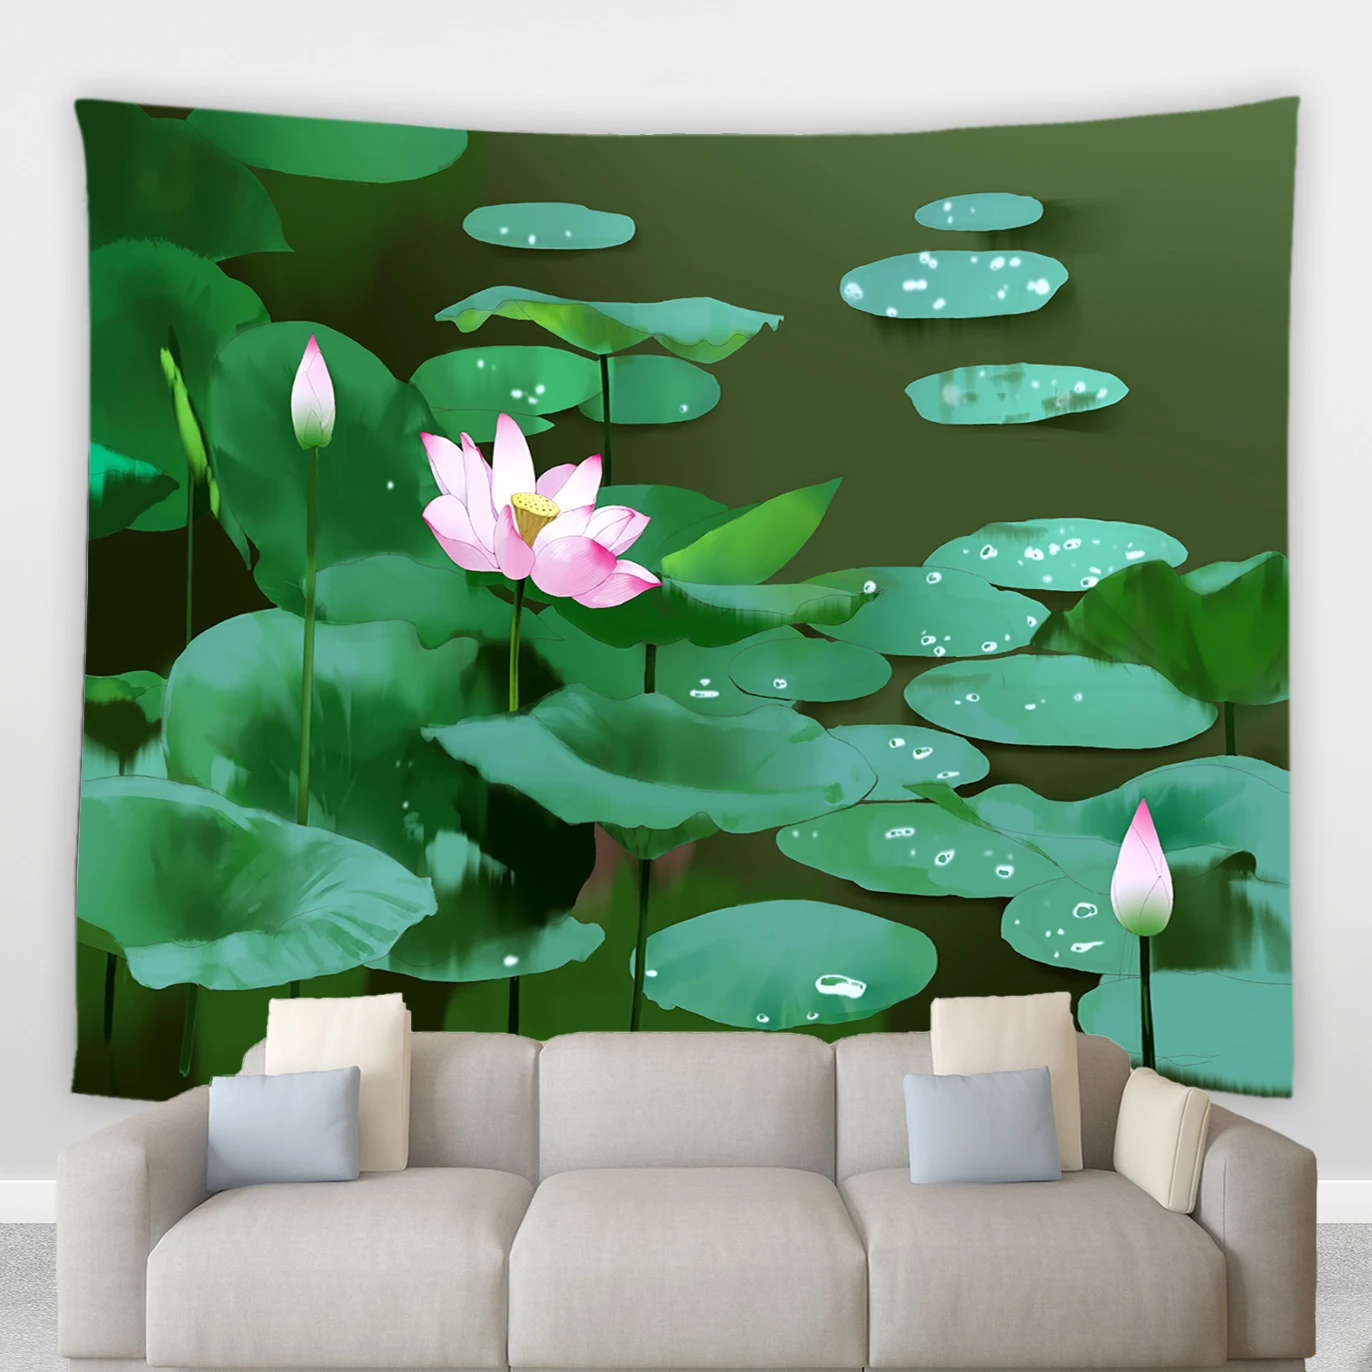 

Flowers Landscape Tapestry Plants Green Leaves Garden Pond Lotus Living Room Bedroom Wall Hanging Decorate Curtains Tableclothes